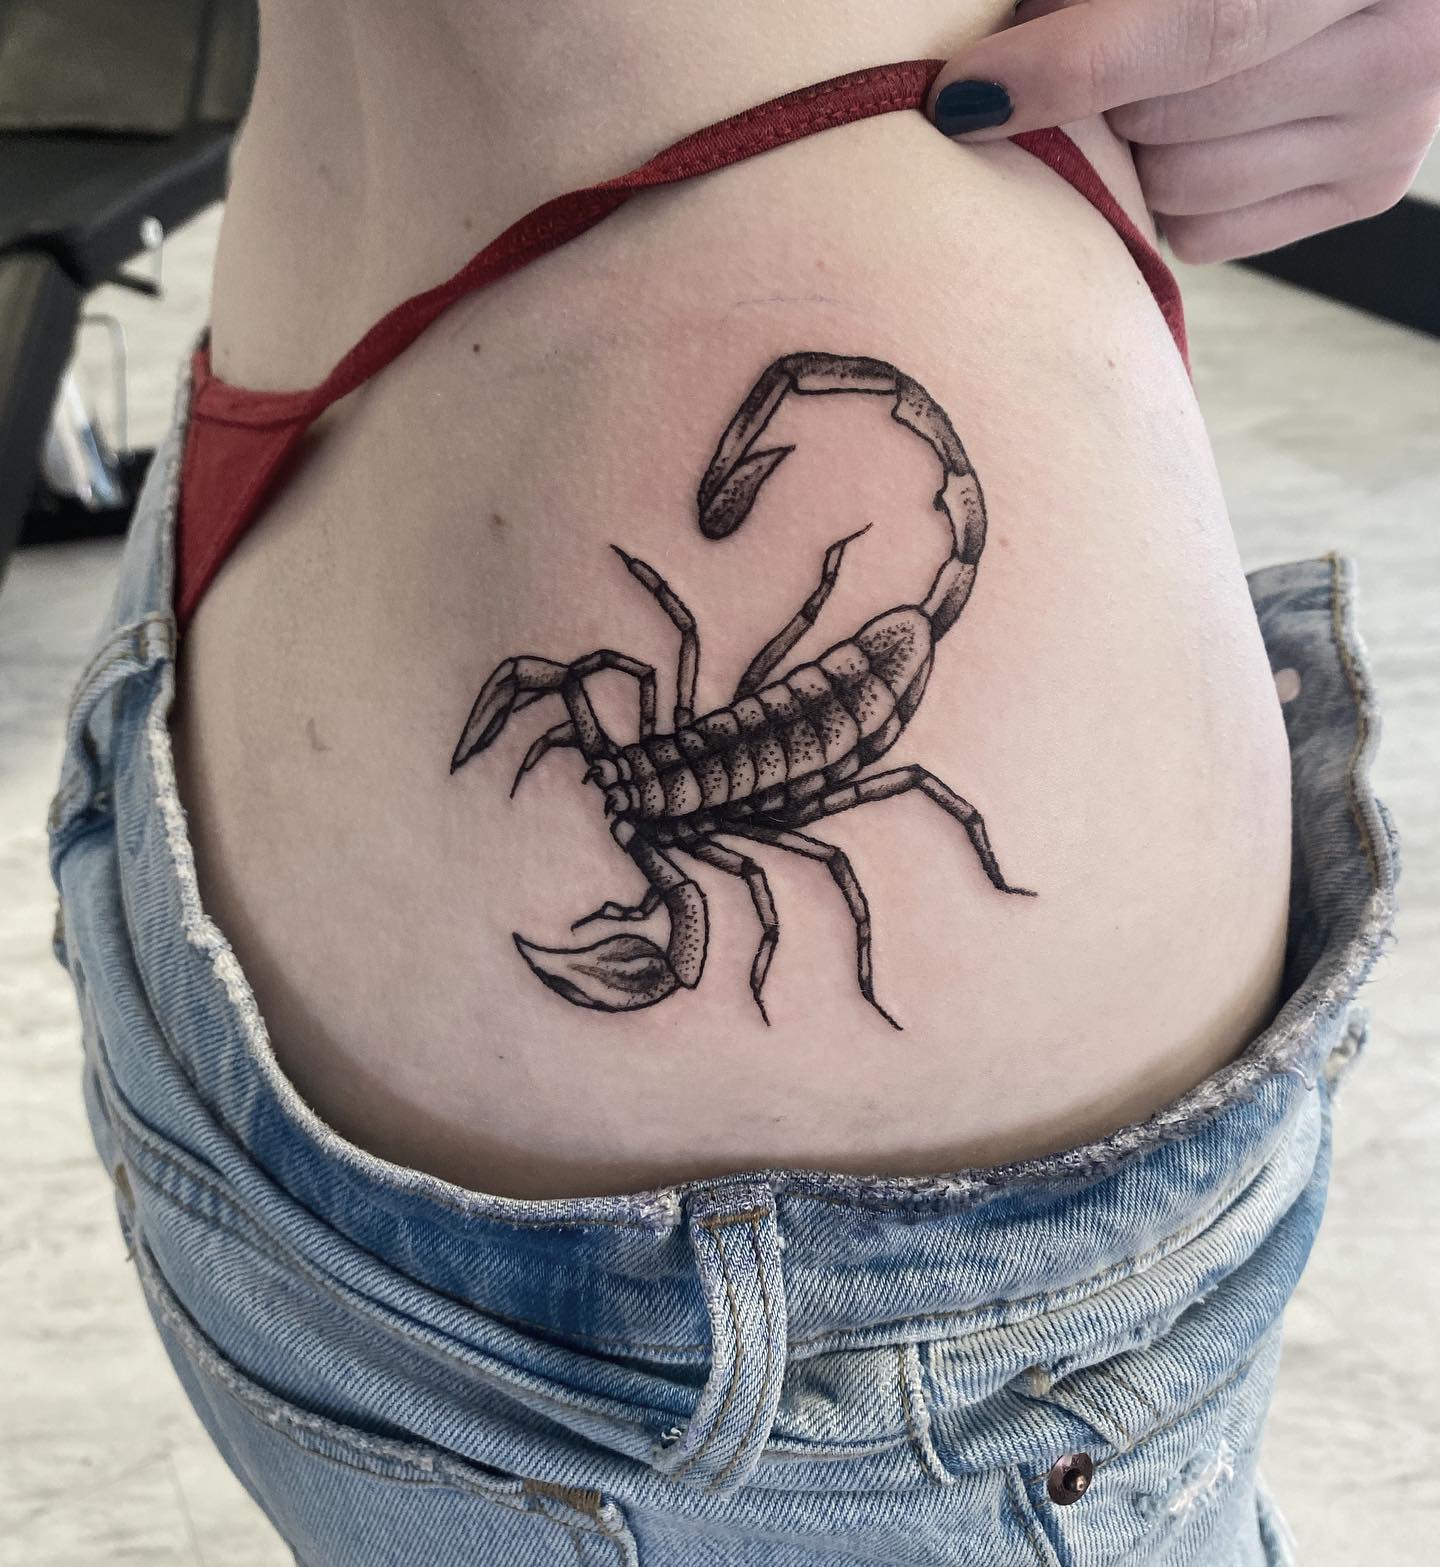 Last, but not least, why not go for this giant scorpion tattoo and place it on your hip? Show that you’re little and feisty, or let the world know that this is your zodiac sign.